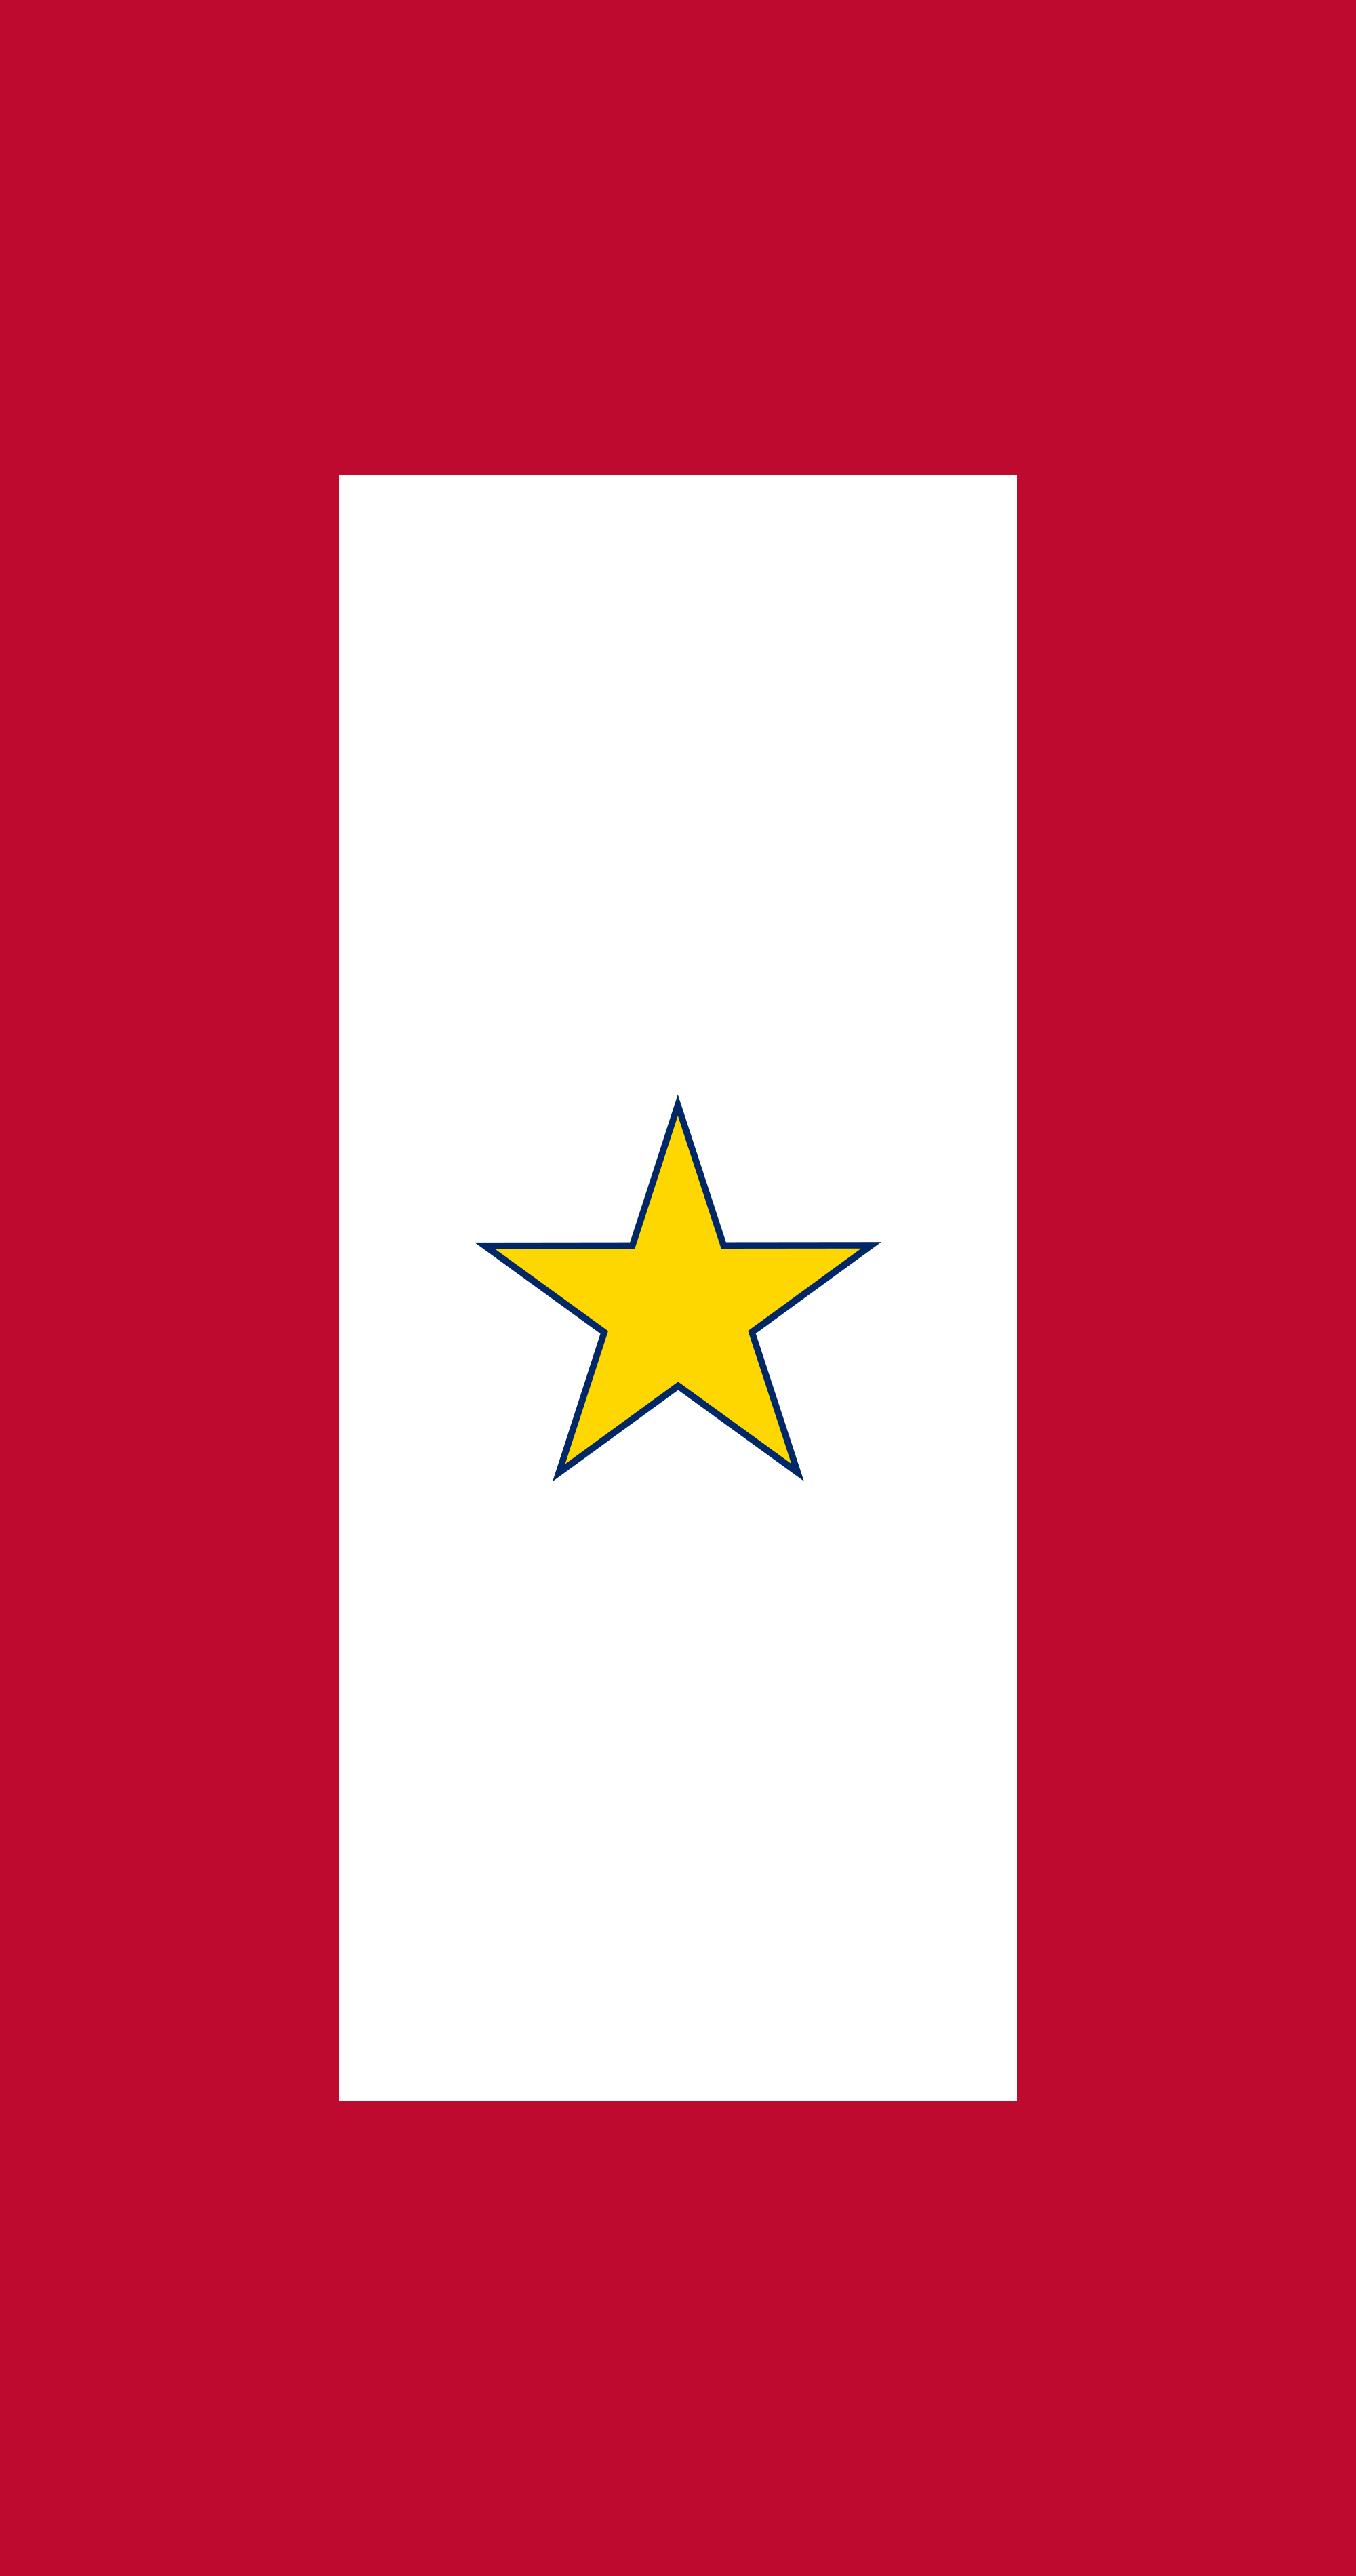 The History And Meaning Of Gold Star Mothers Wvxu